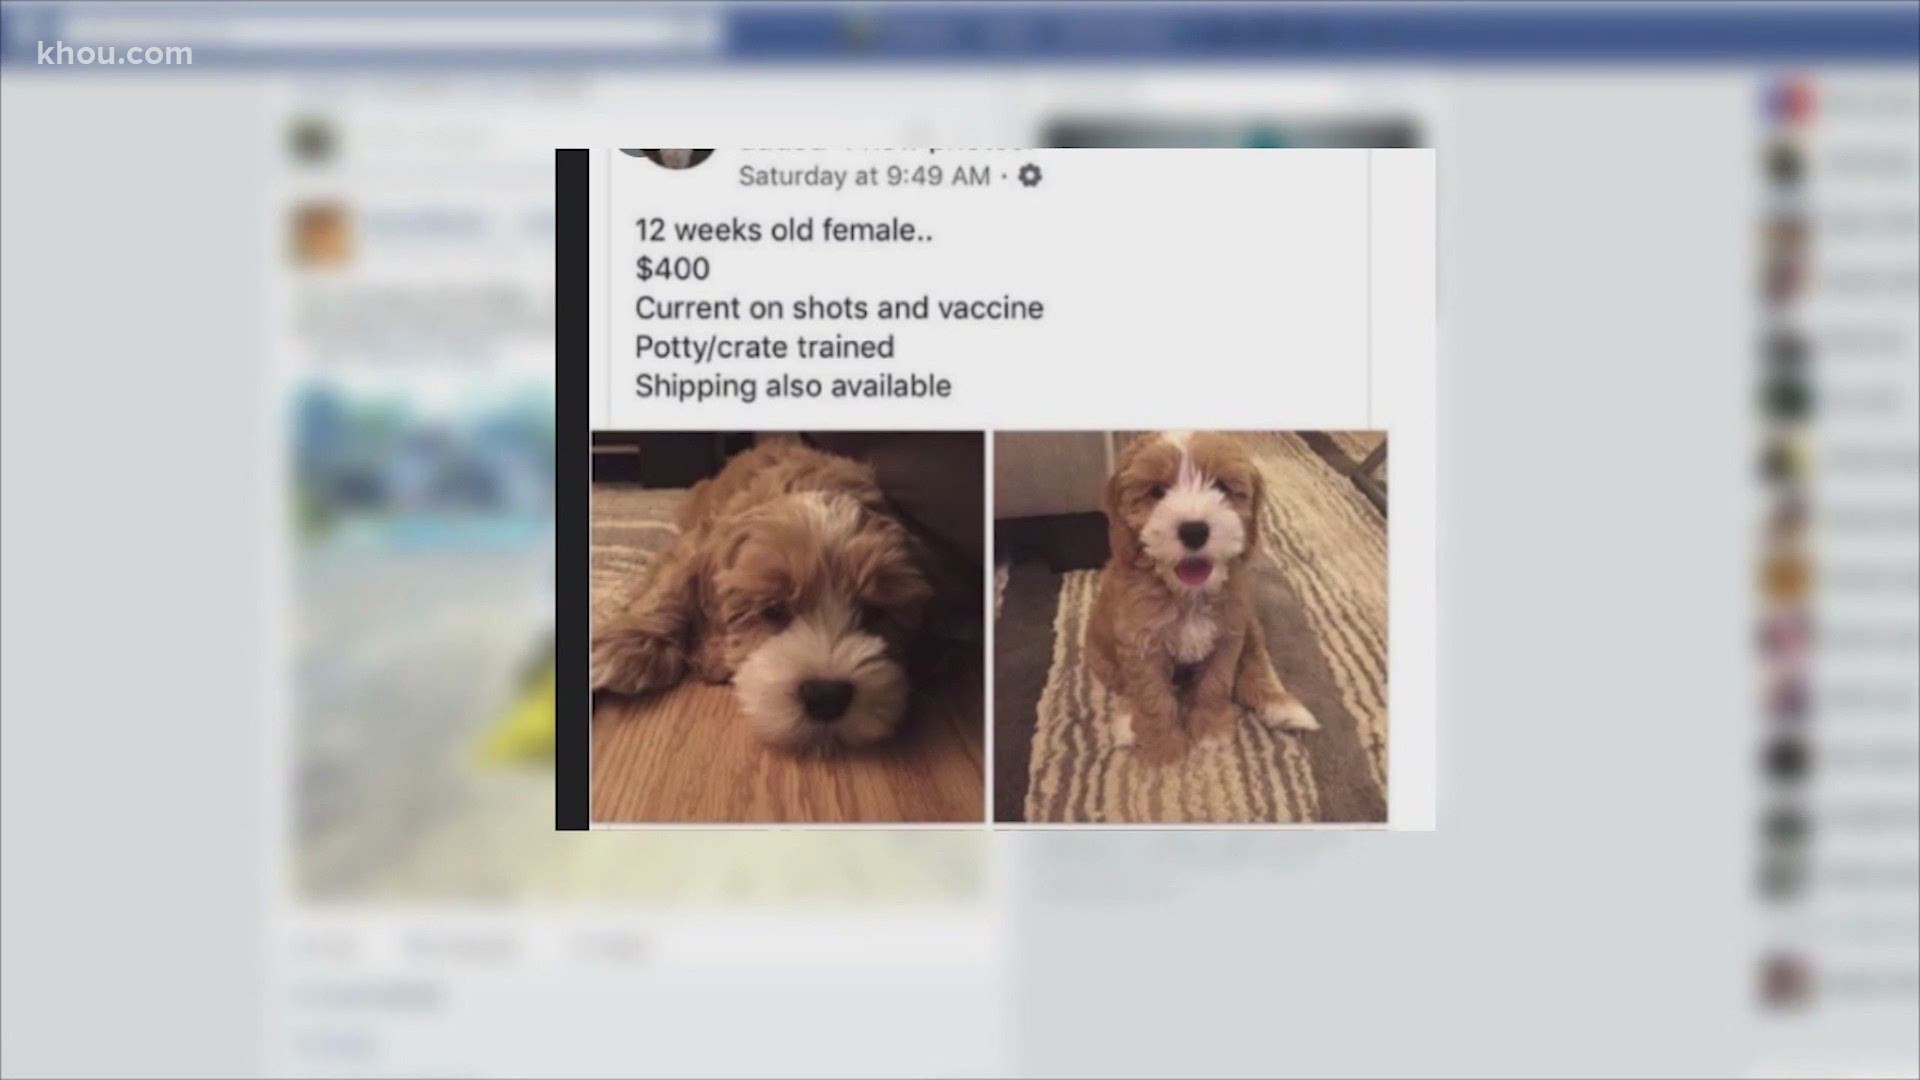 Reporter John Matarese says these puppies won't steal your puppy, they'll steal your money!